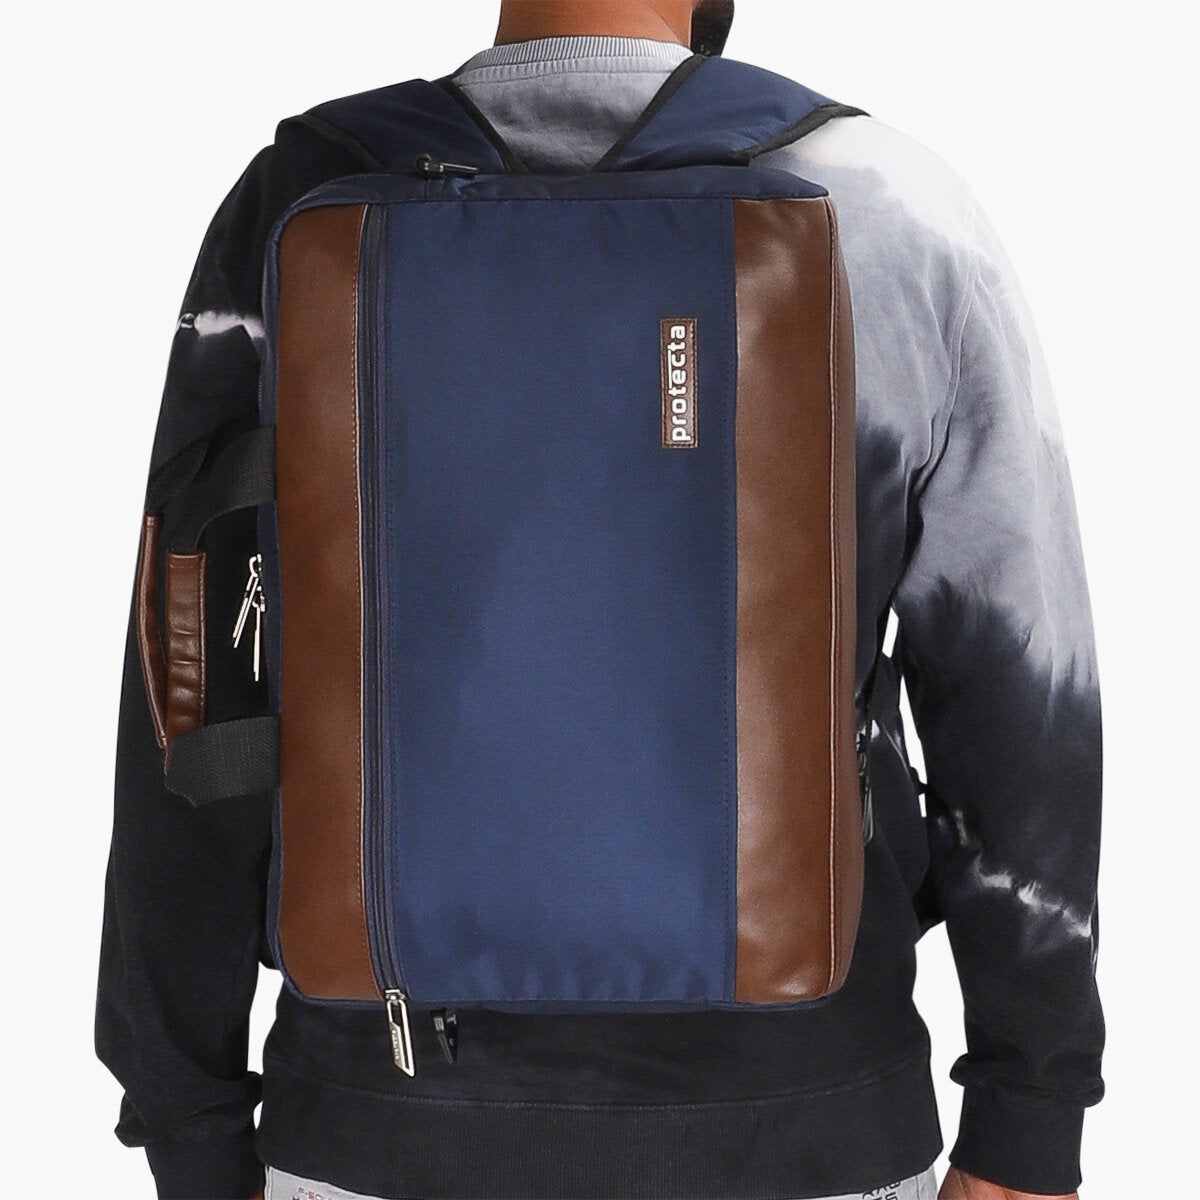 Navy | Protecta The Underdog Convertible Briefcase Backpack - 10